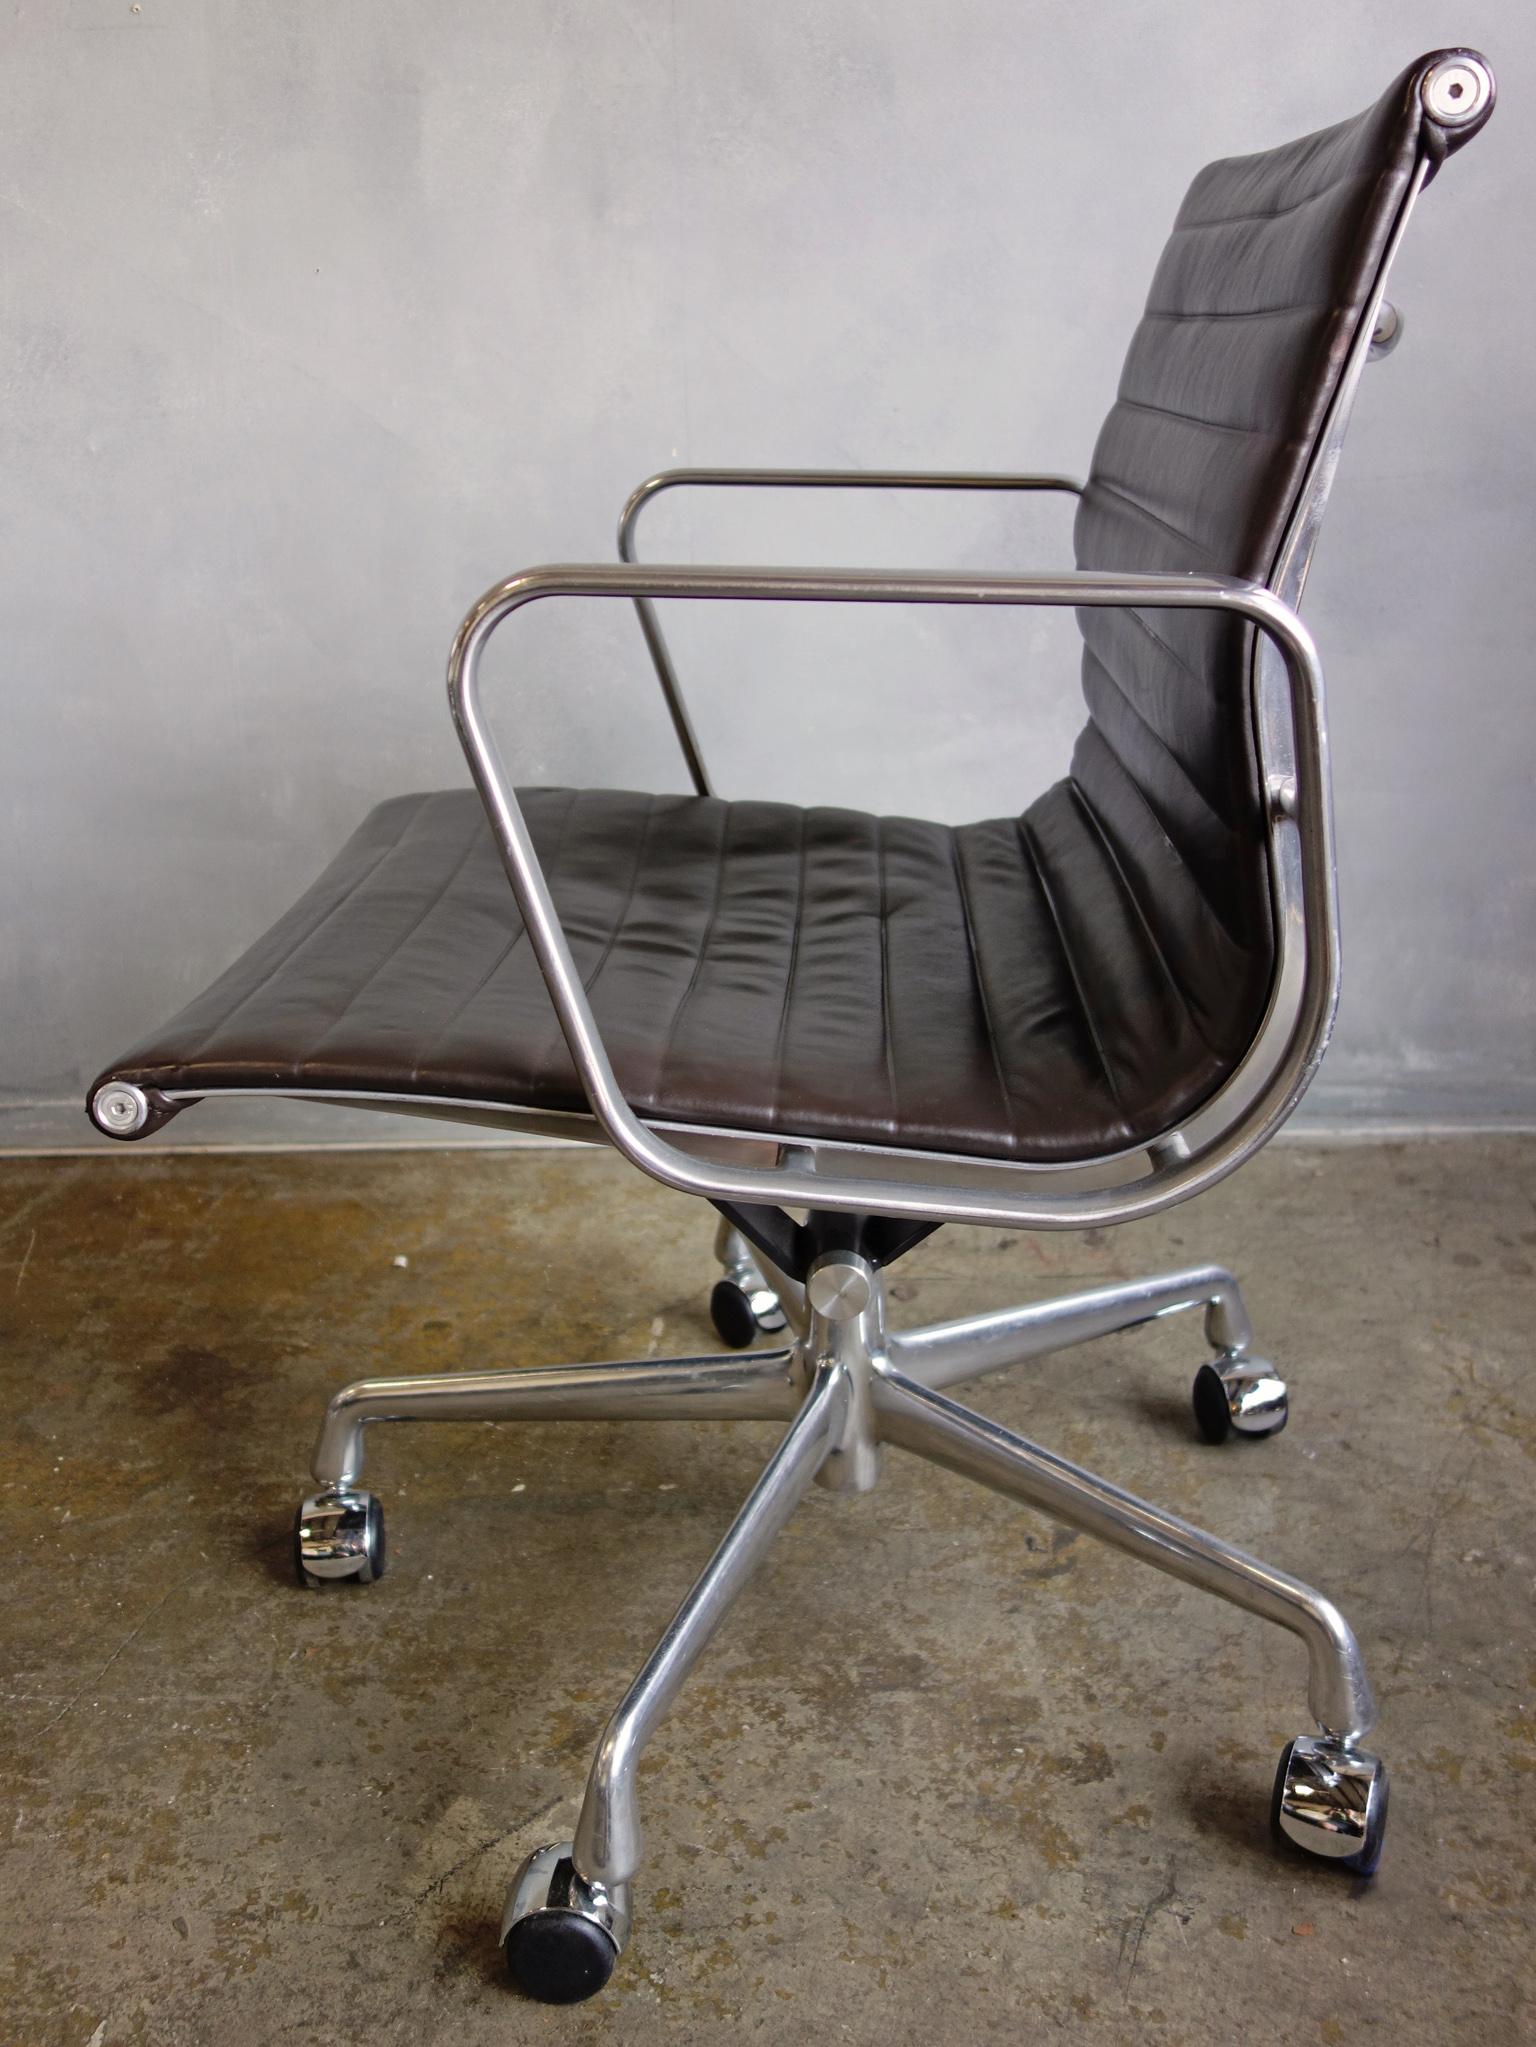 For your consideration are up to 12 midcentury Eames side chairs upholstered in Espresso Brown leather. Elegance and comfort separates this iconic chair from the rest. First produced in 1958 and still in production makes this one of the most sought